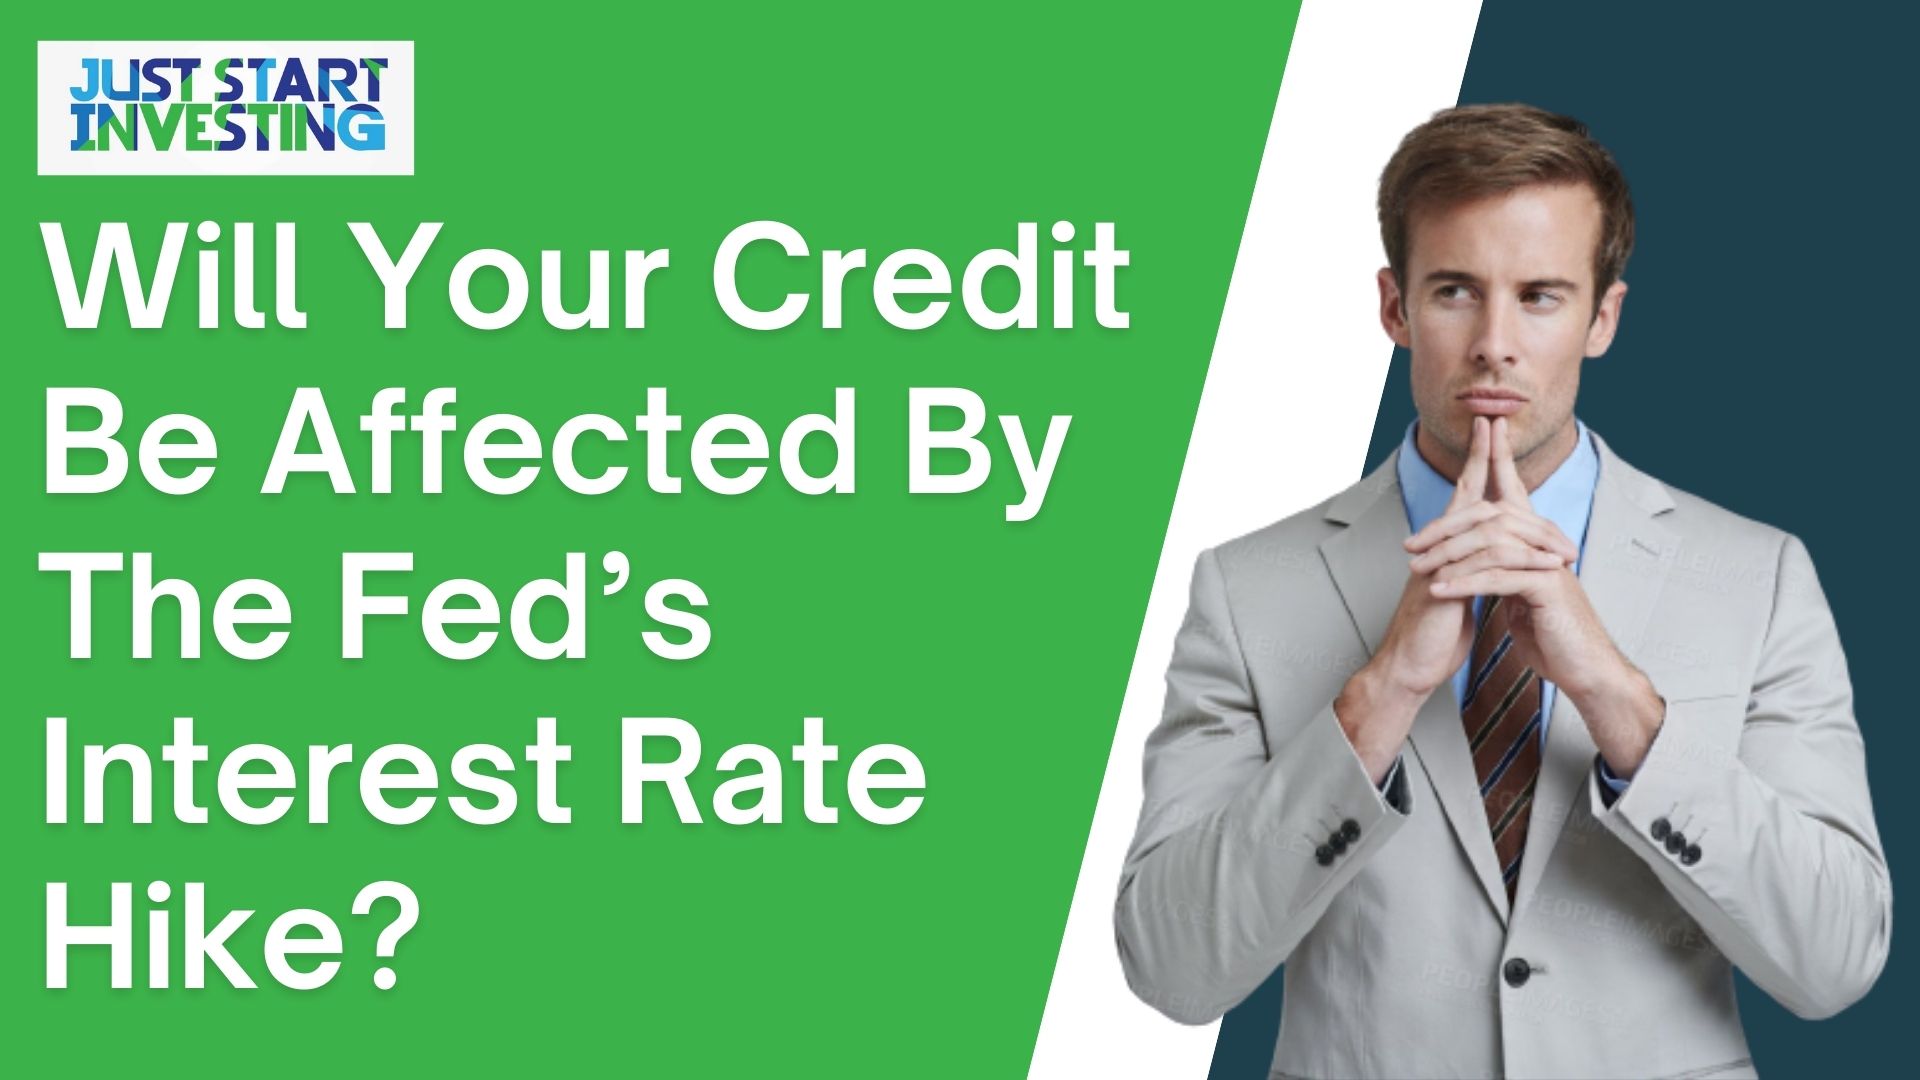 Will Your Credit Be Affected By The Fed’s Interest Rate Hike